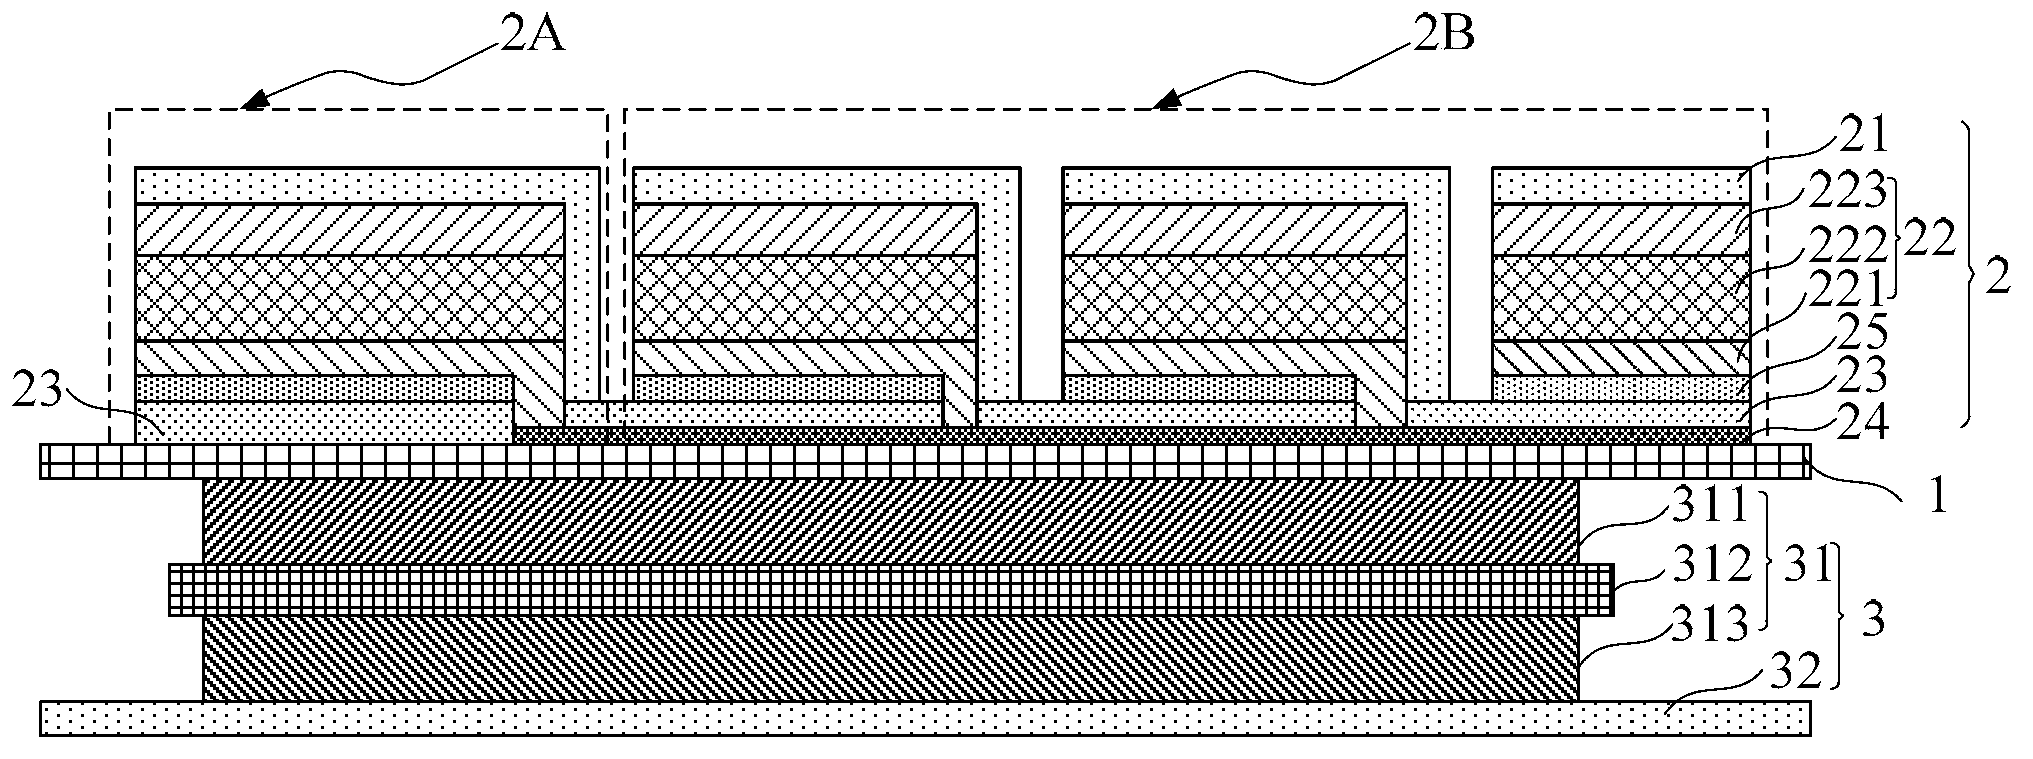 Solar power generation and storage integrated device